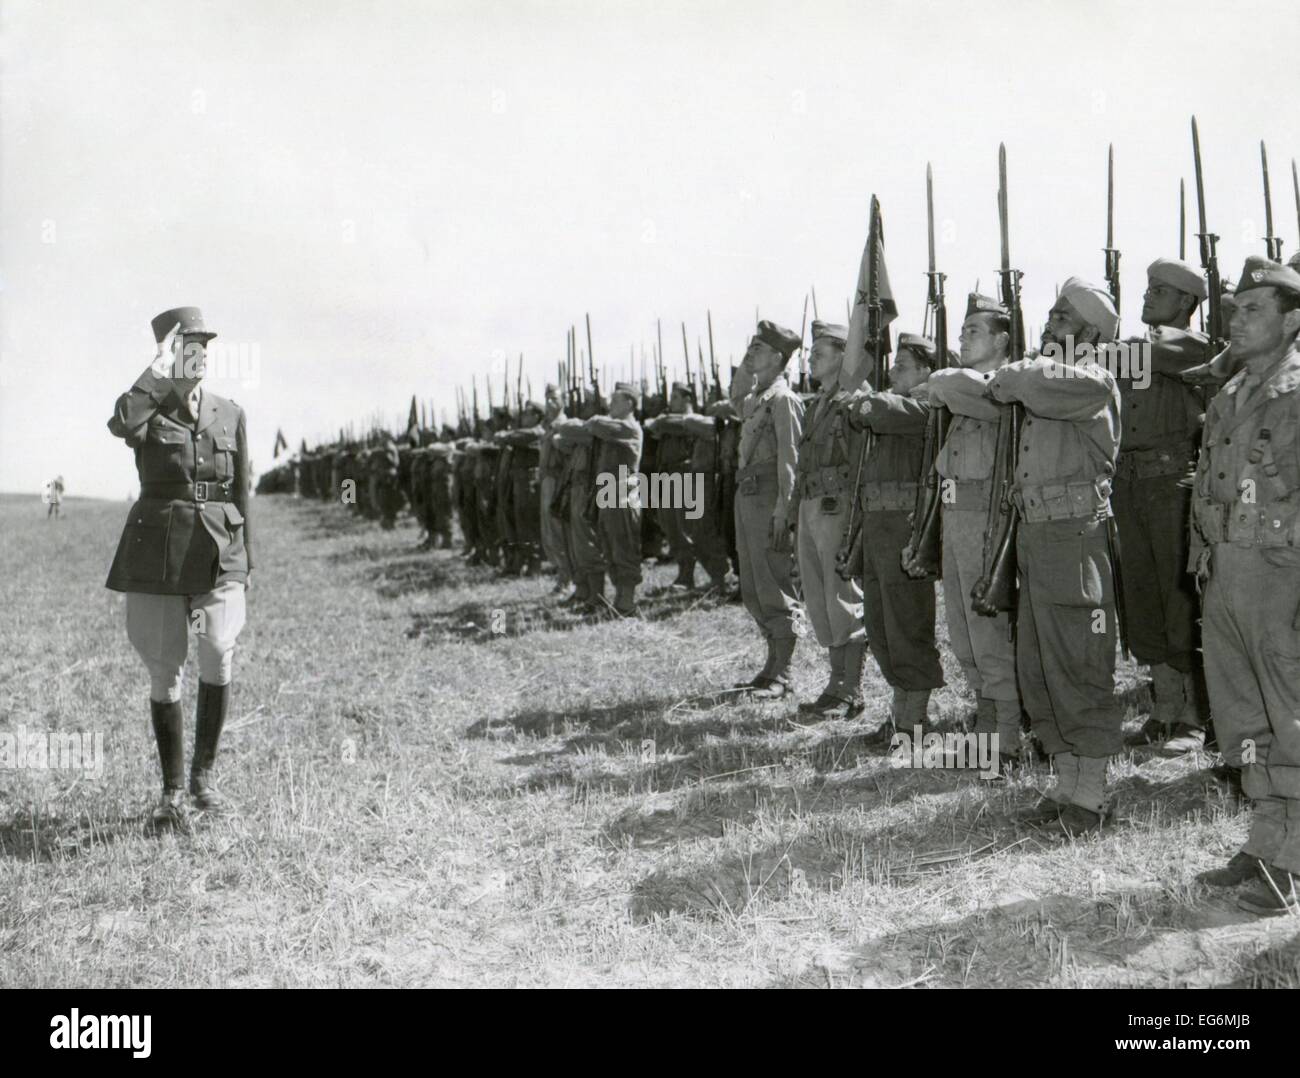 General Charles DeGaulle reviews French Expeditionary Forces. Montenero area, Italy, June 29, 1944. World War 2. Stock Photo